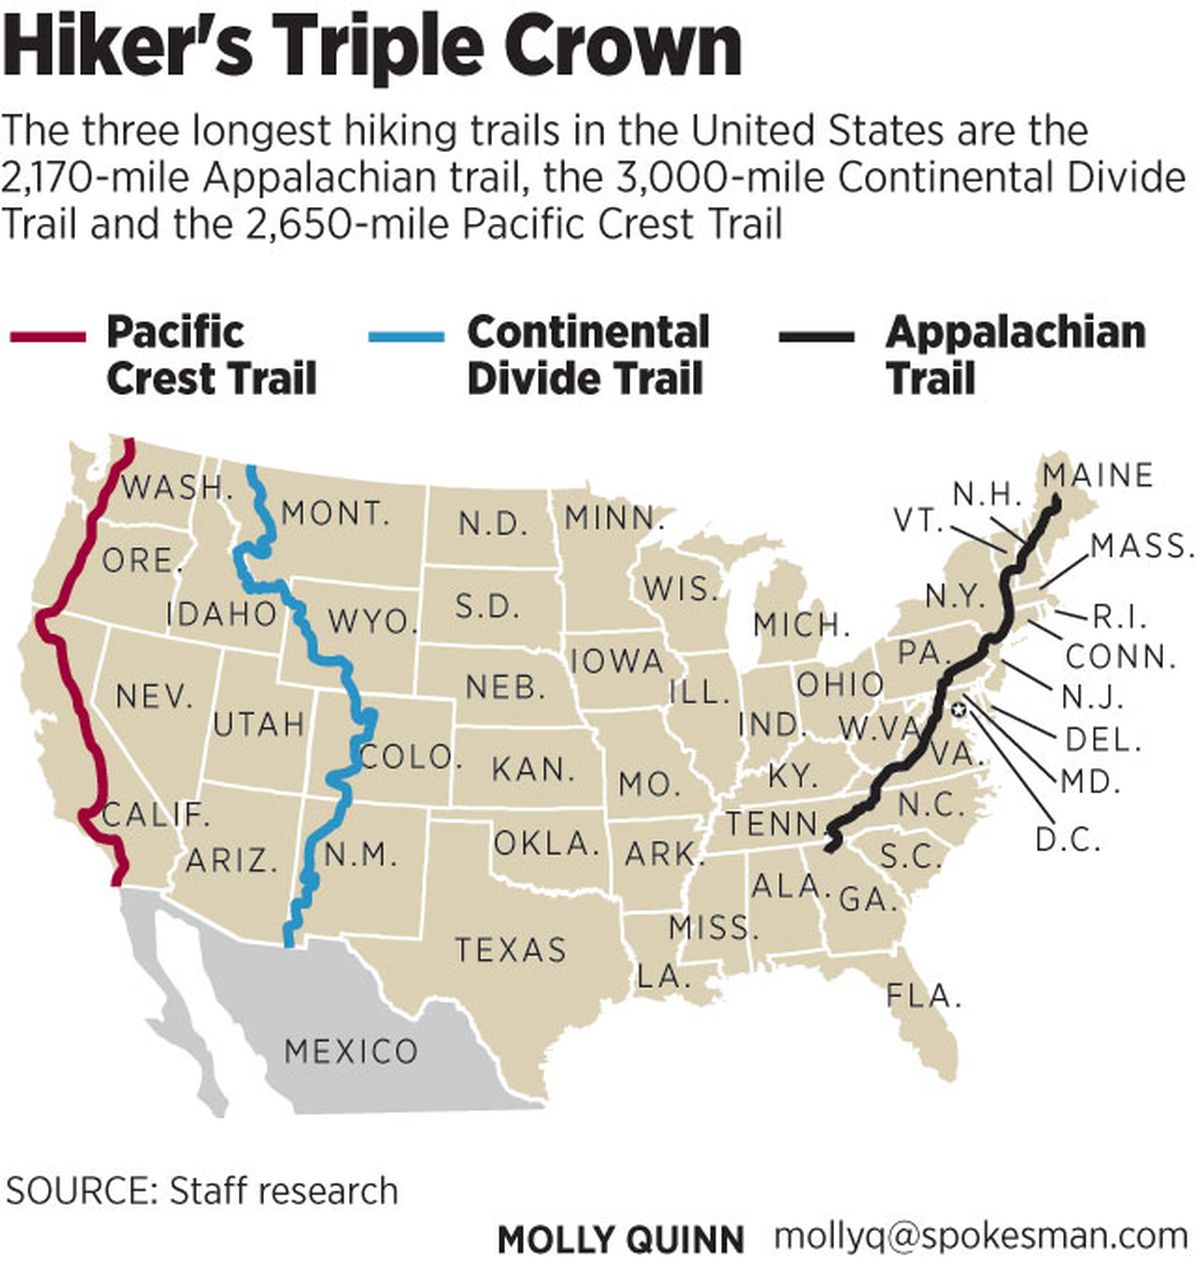 The Triple Crown for long-distance hikers includes the Pacific Crest Trail, Continental Divide Trail and Appalachian Trail.